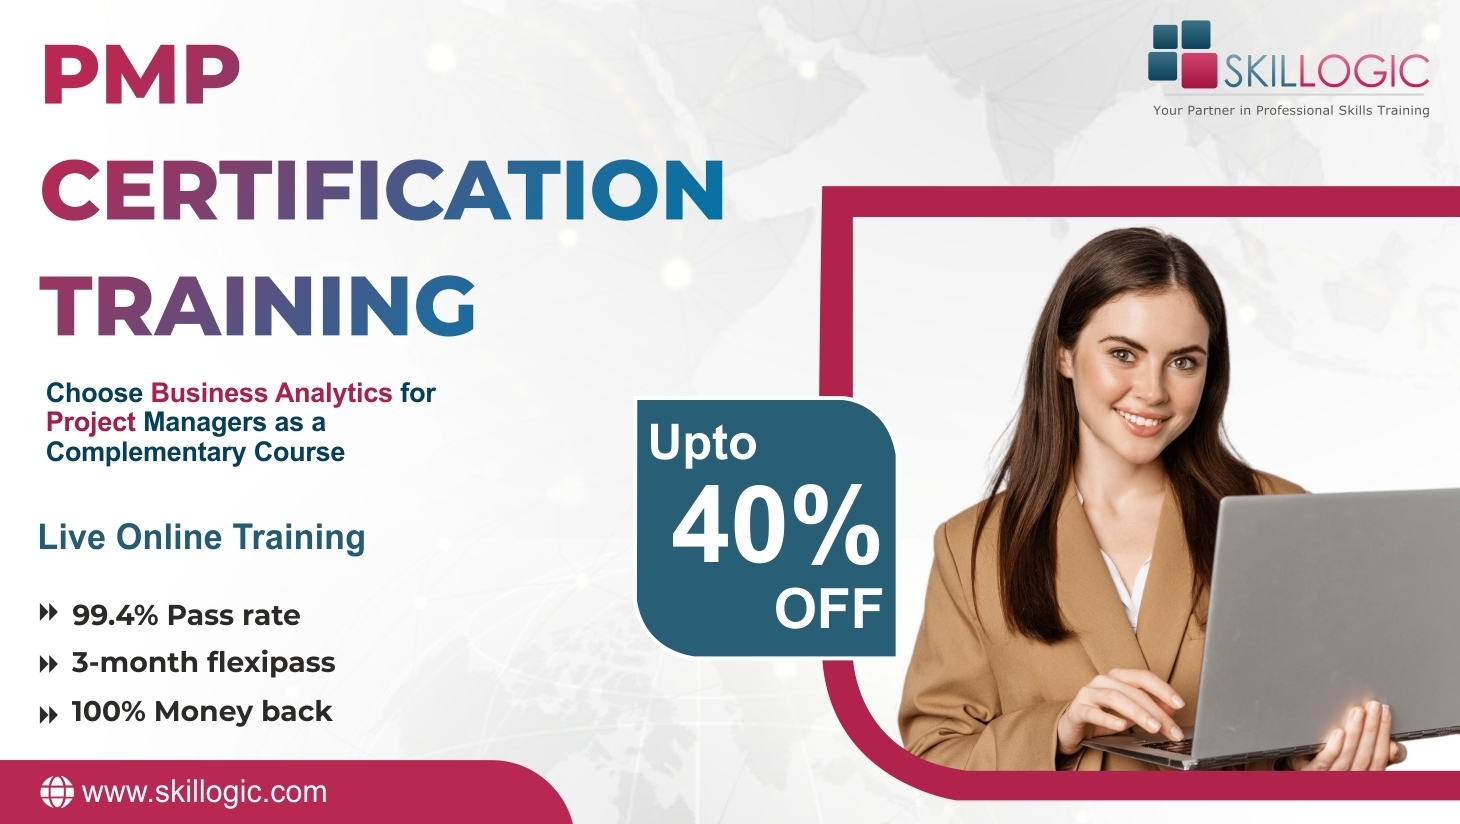 PMP Certification Training in Pune, Online Event